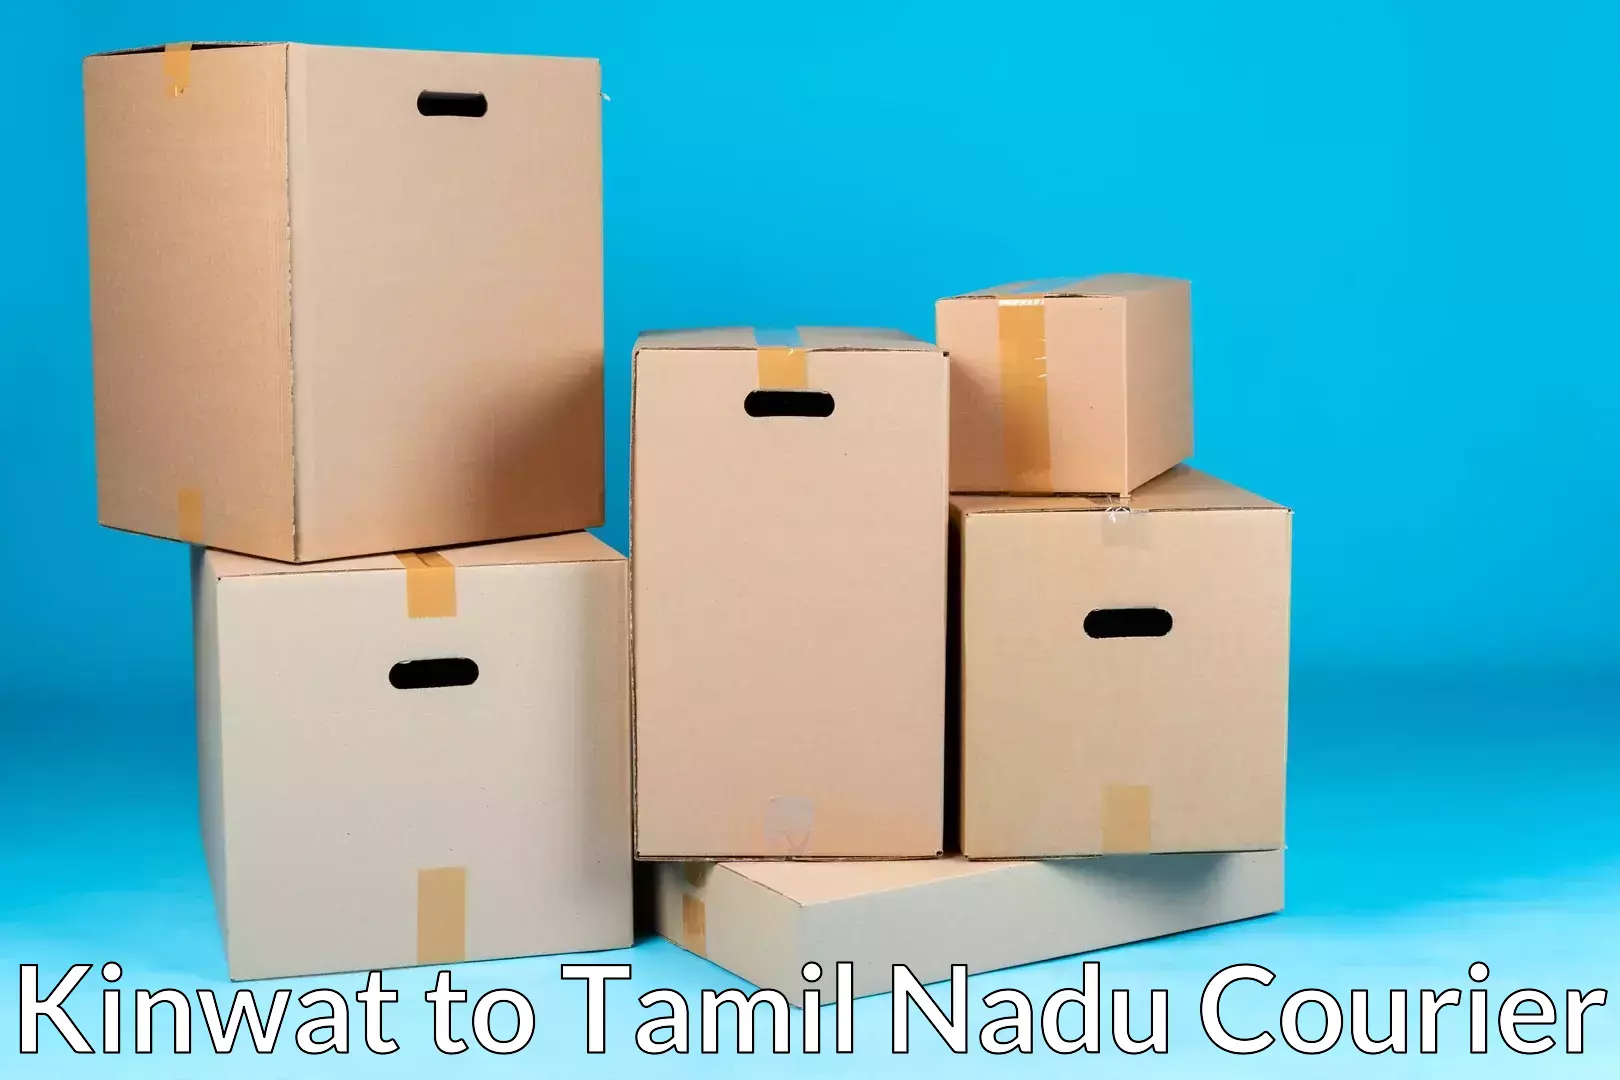 Moving and packing experts Kinwat to Tamil Nadu